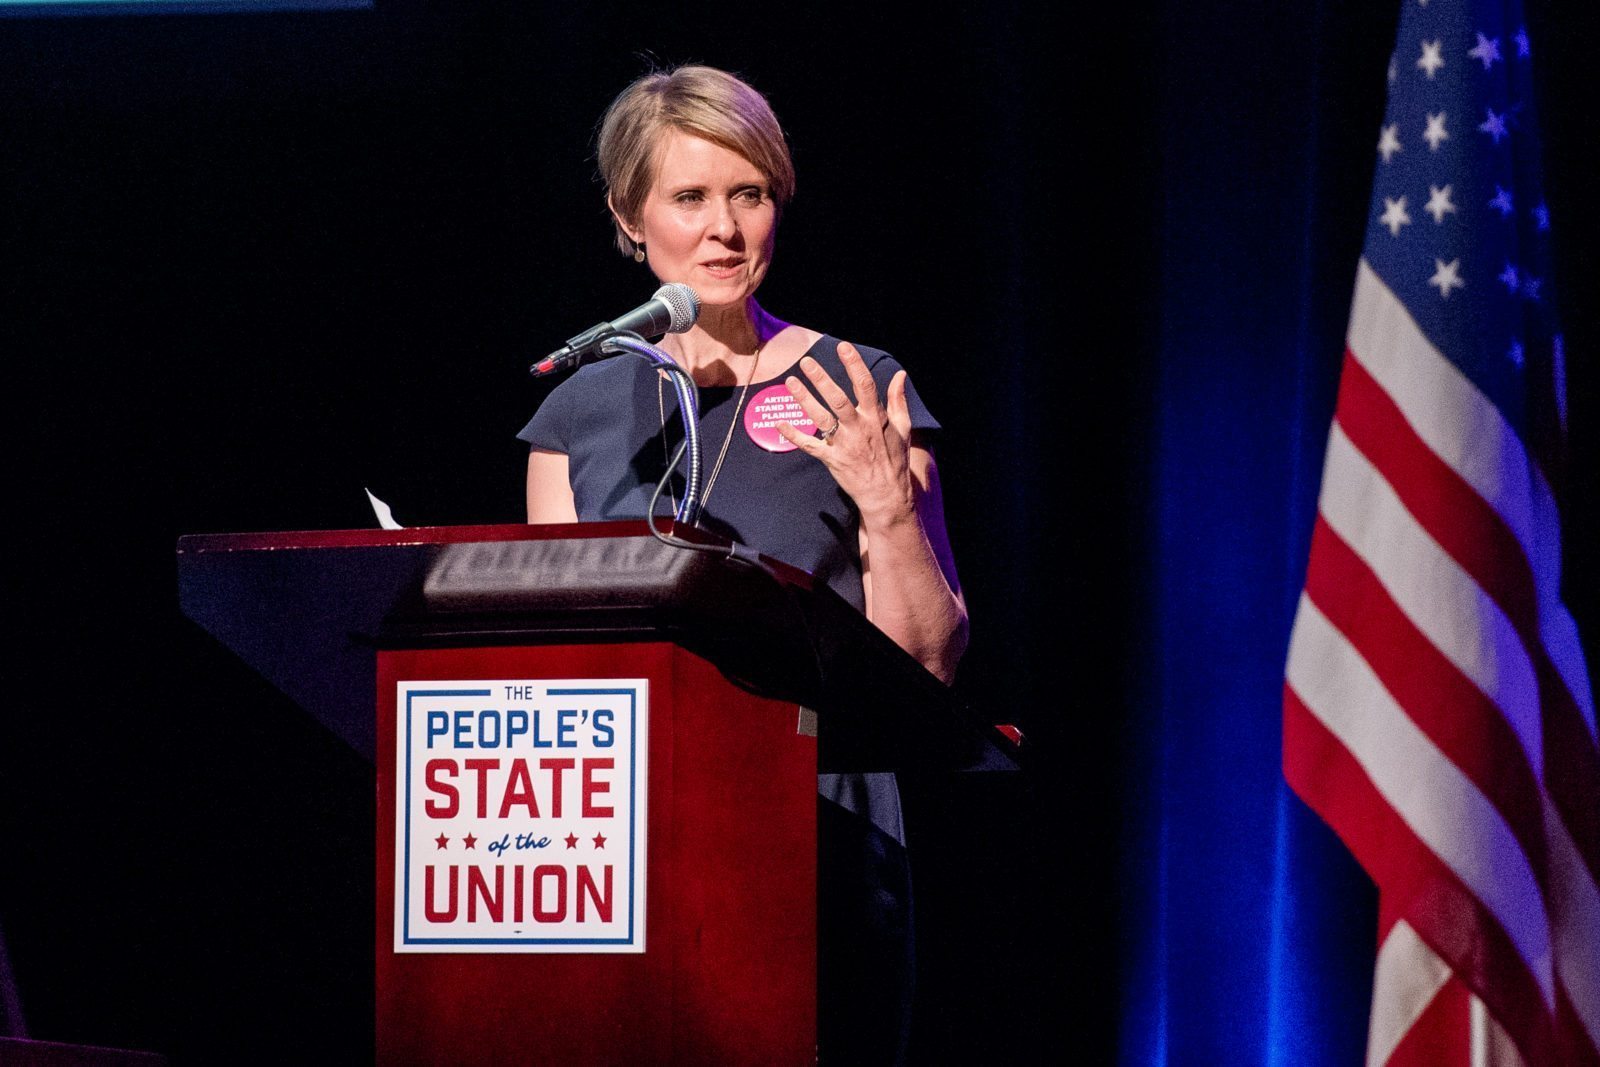 NEW YORK, NY - JANUARY 29: Cynthia Nixon speaks onstage during The People's State Of The Union at Town Hall on January 29, 2018 in New York City. (Photo by Roy Rochlin/Getty Images)